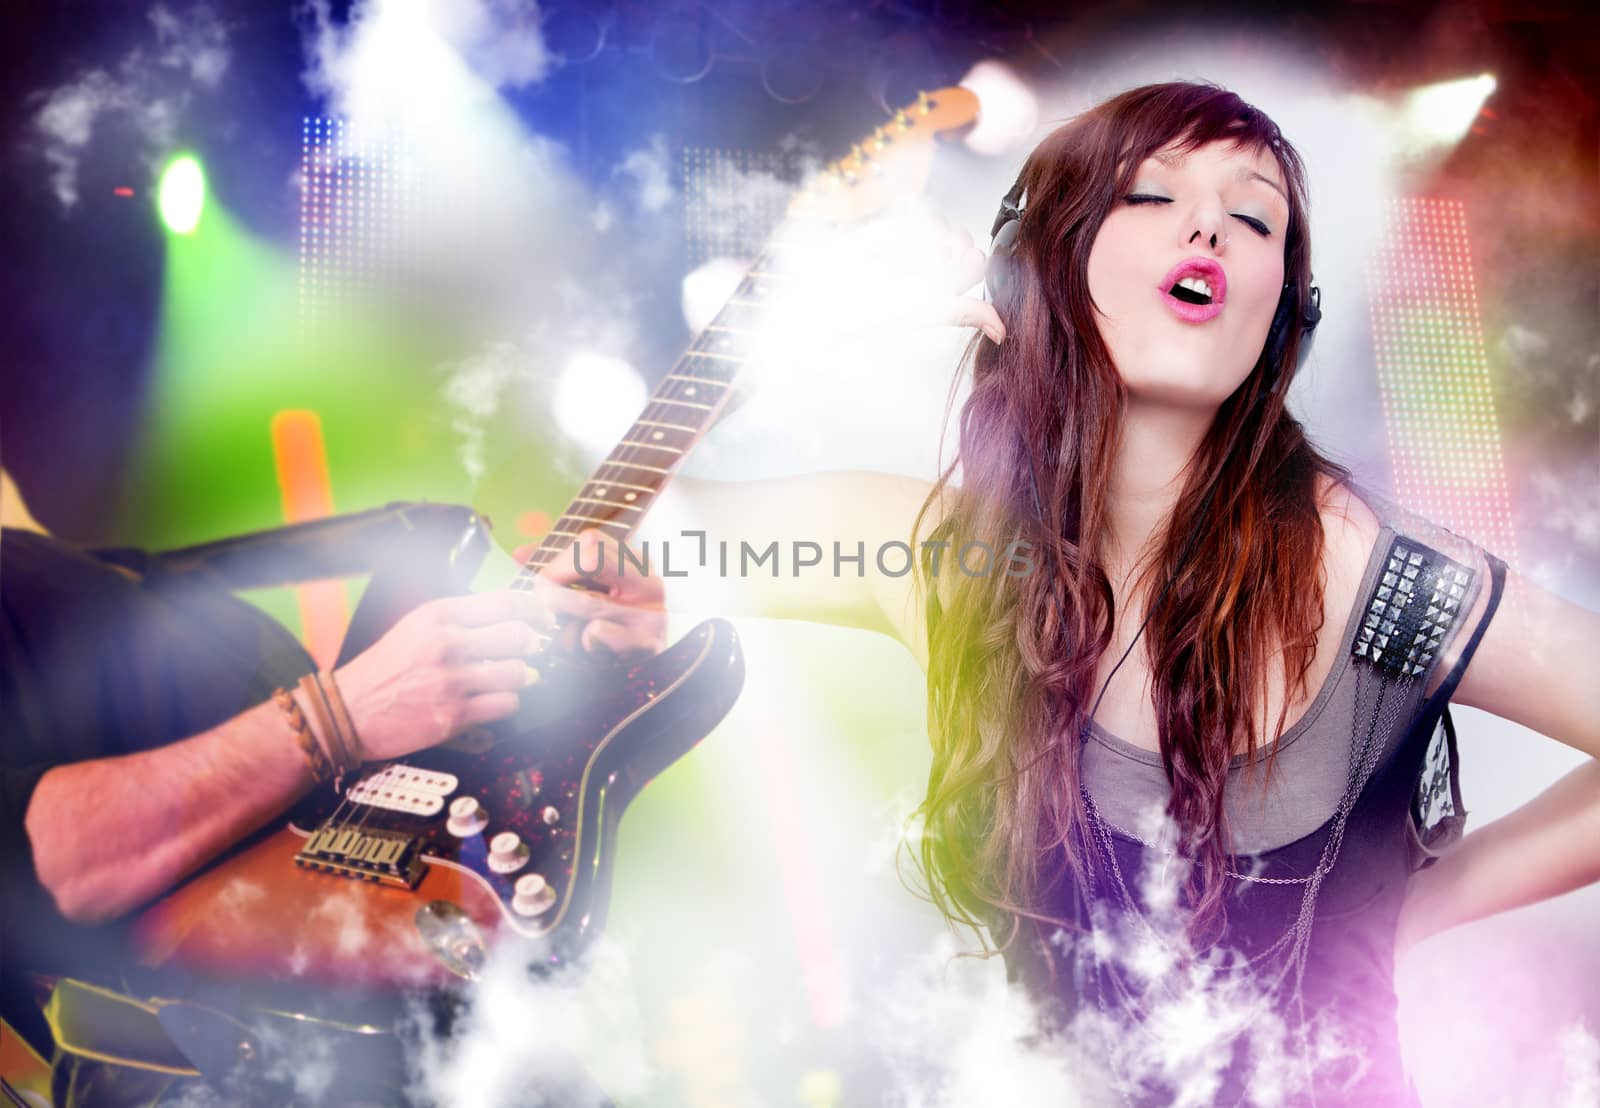 beautiful woman listening to music with headphones and singing. Live music background with guitar and bright lights on stage. Live music and party concept.